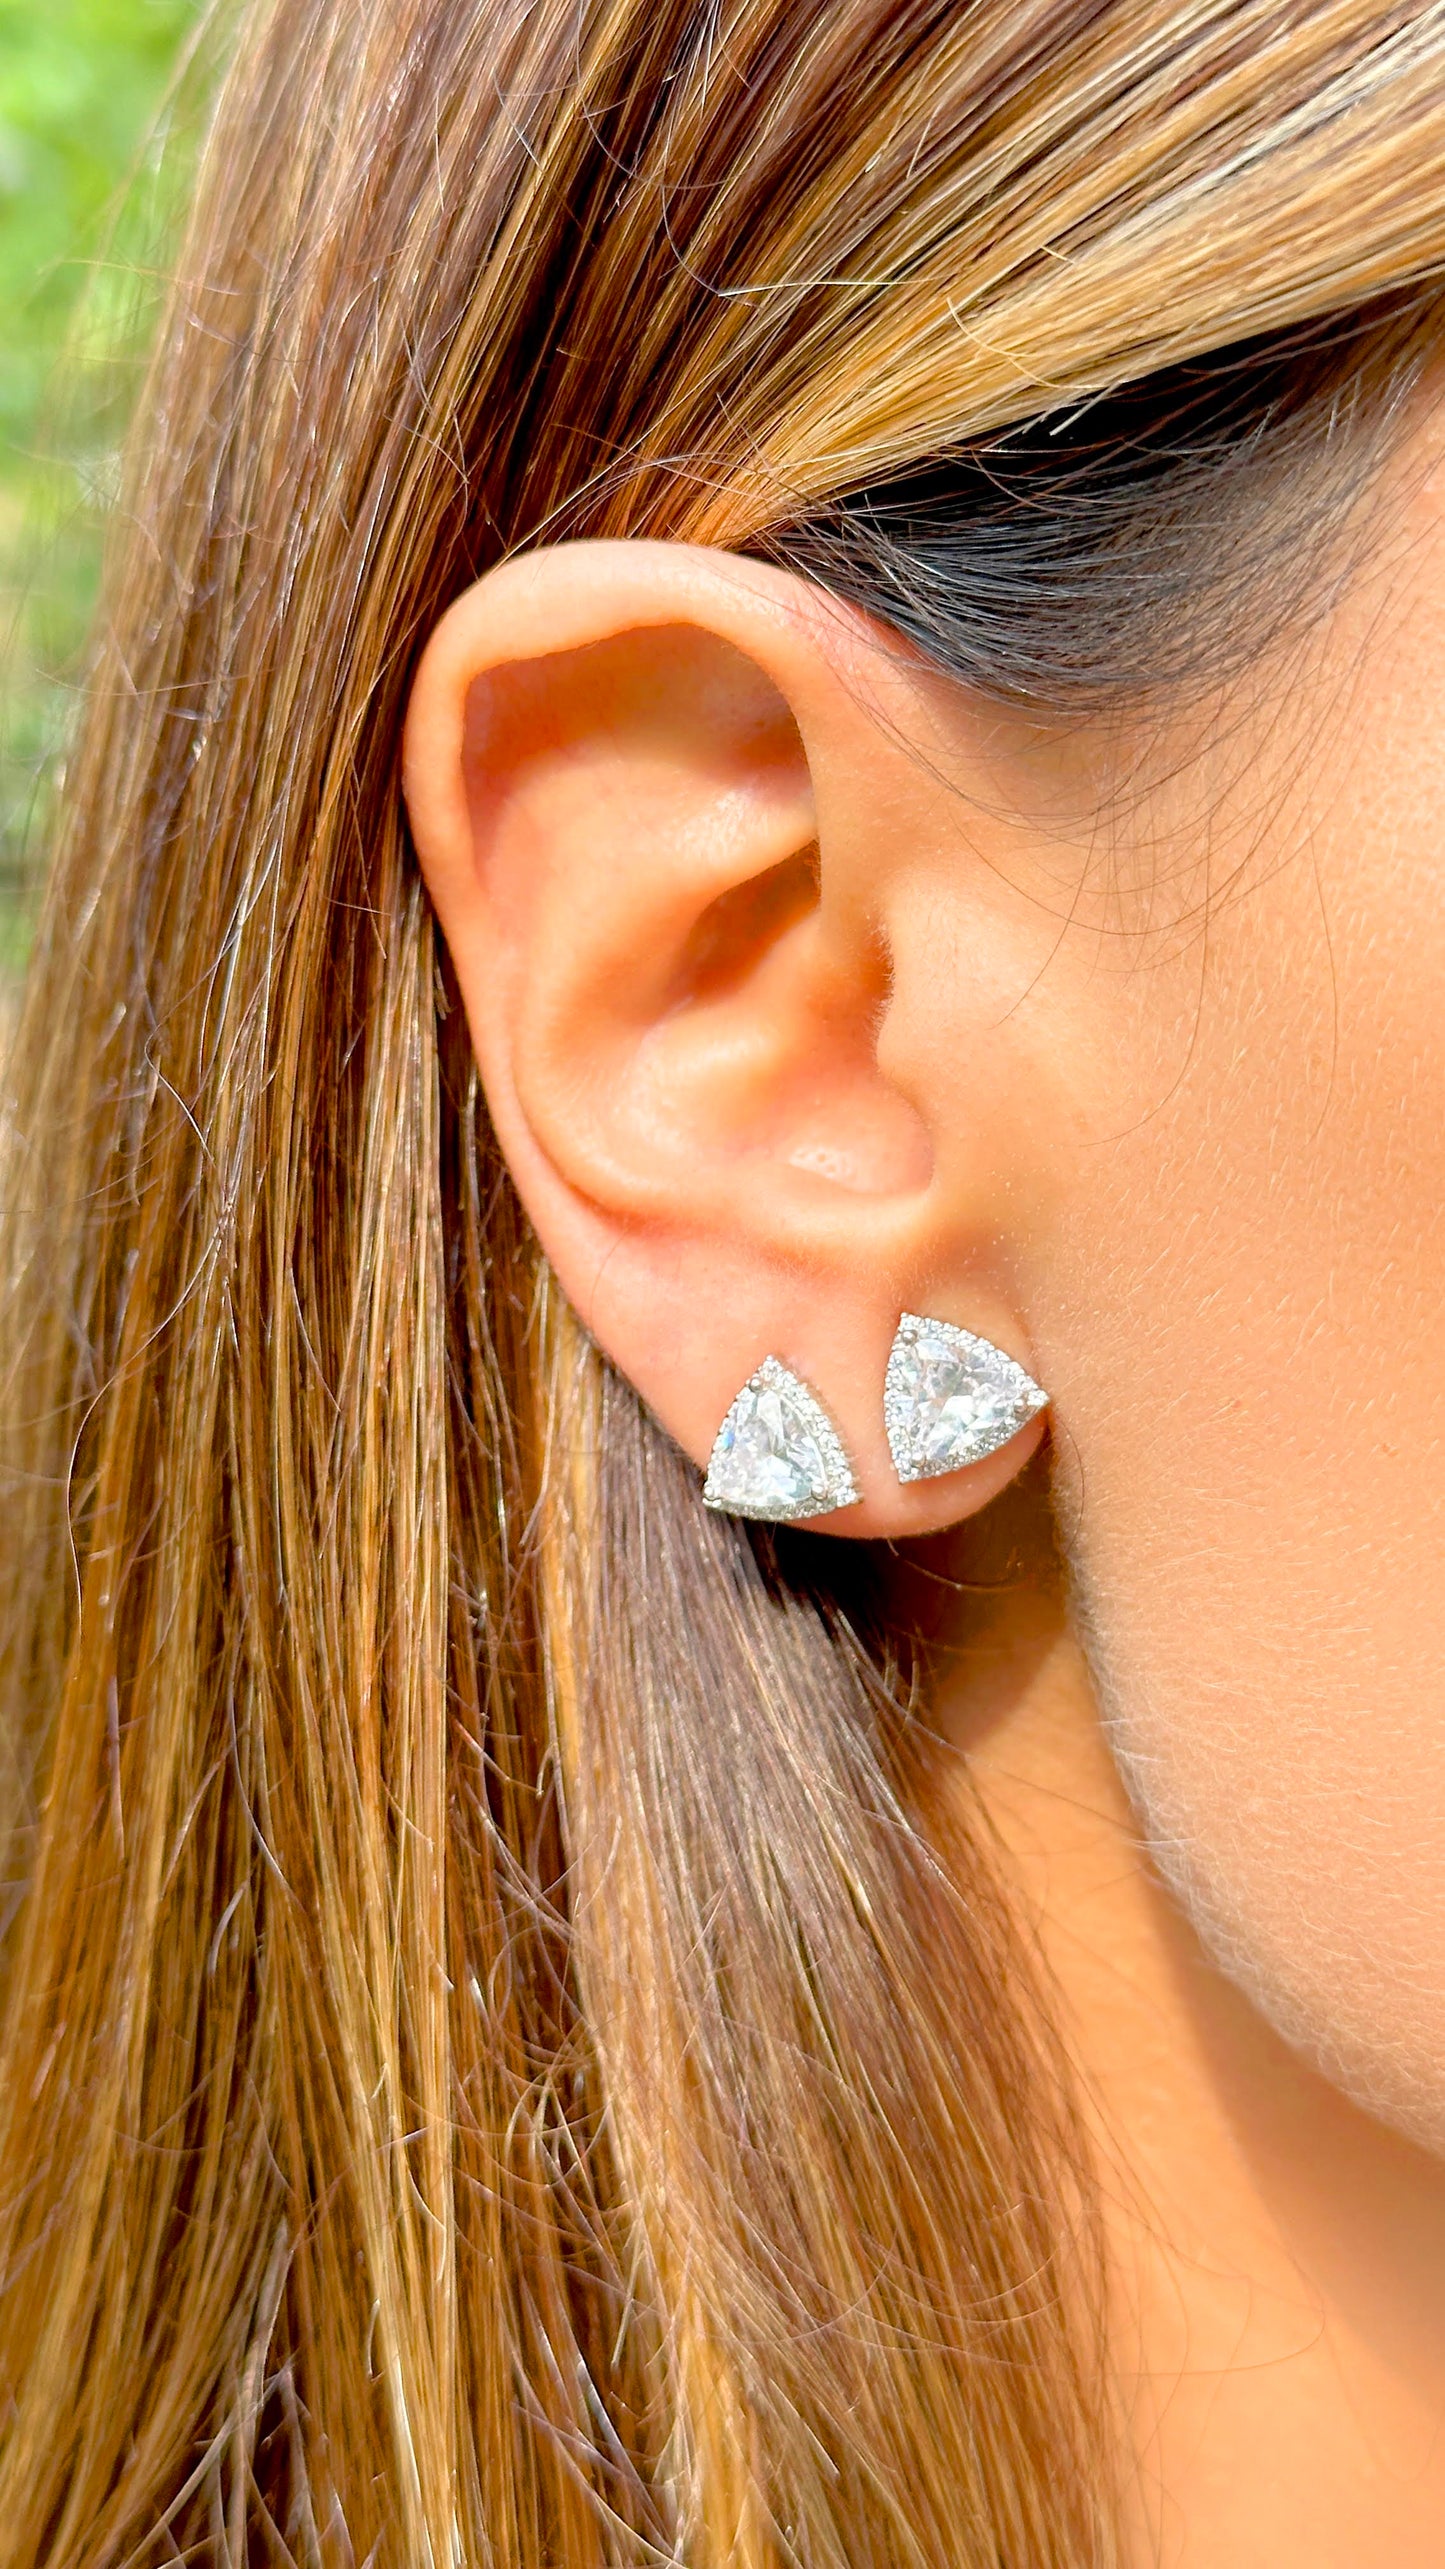 Zirconia Triangle Set in 925 Sterling Silver